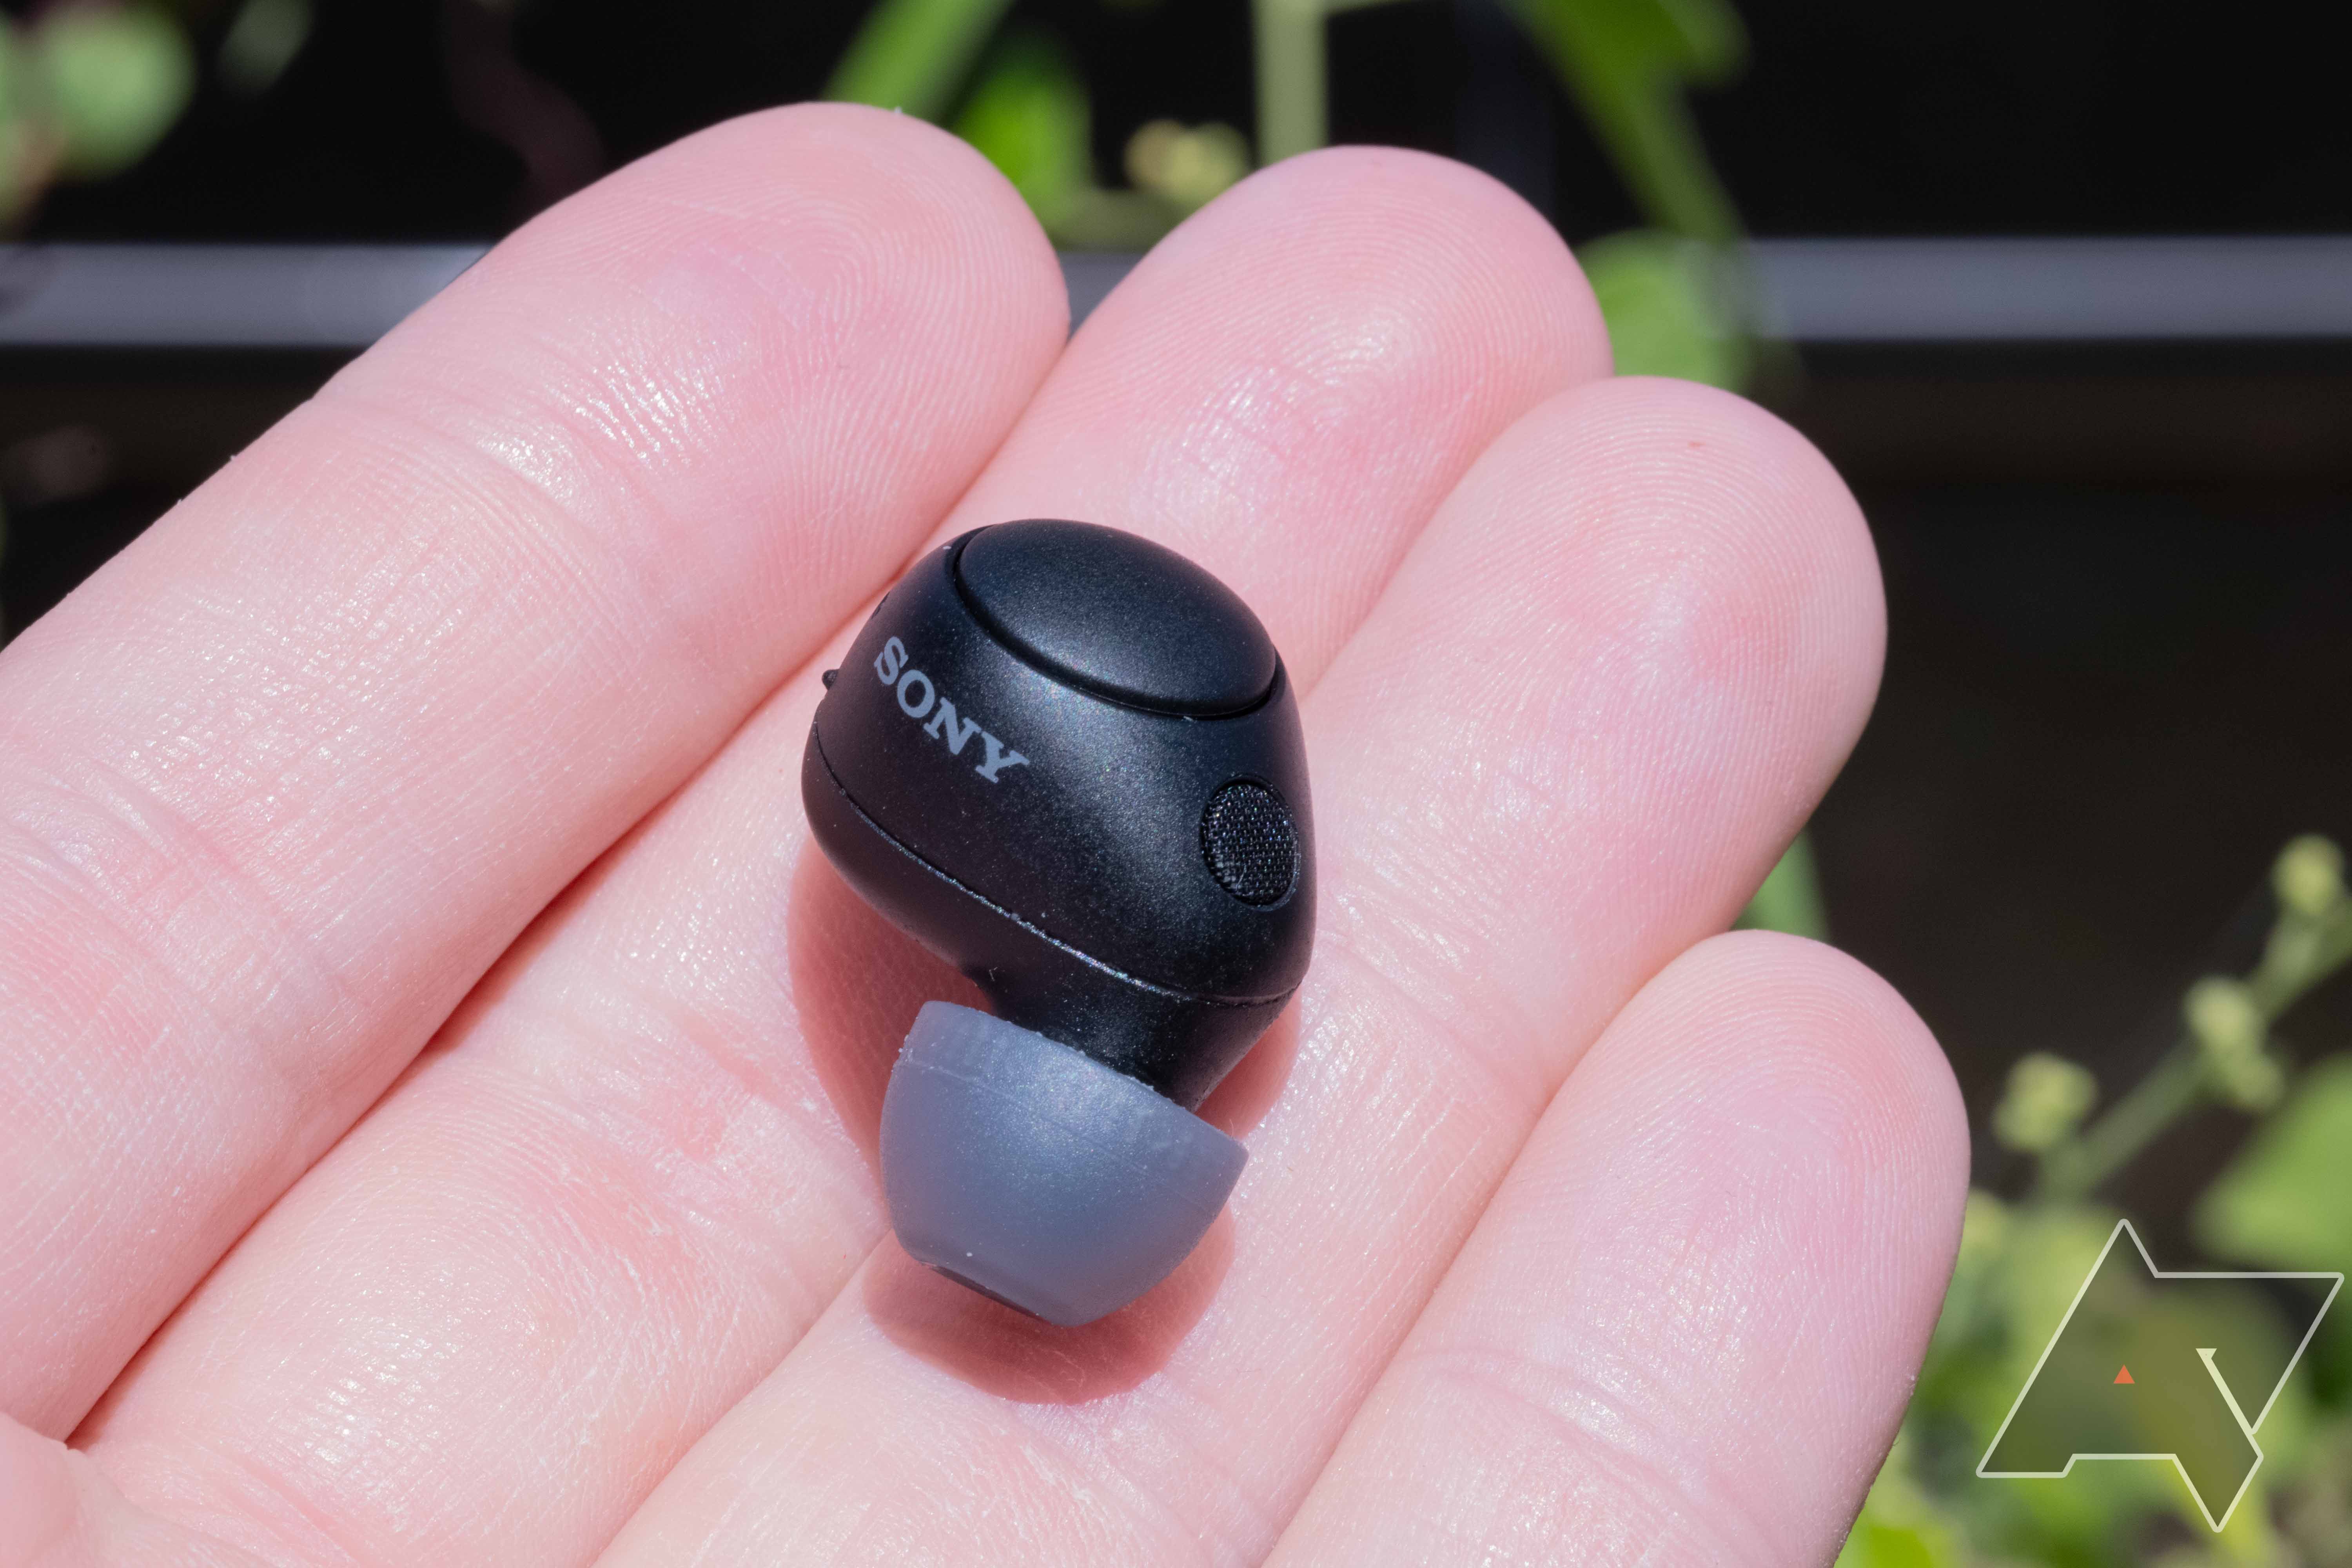 Sony launches WF-C700N truly wireless noise cancelling earbuds – IER Daily